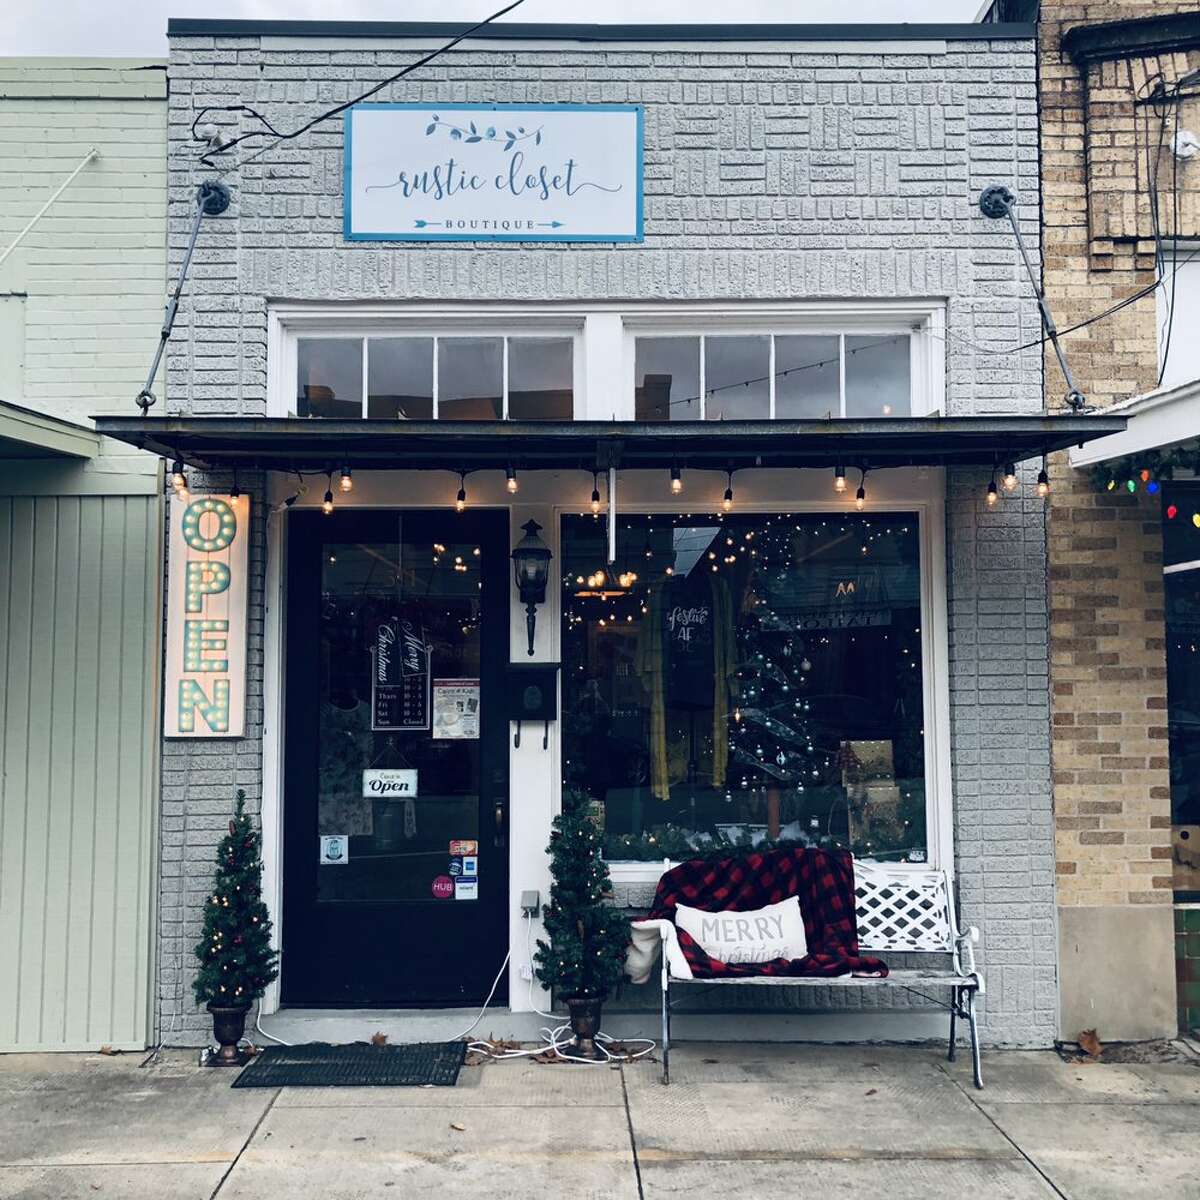 The Rustic Closet Boutique311 Morton Street, RichmondThis adorable boutique in downtown Richmond sells women's apparel, shoes, jewelry, accessories and bath products. Photo by: The Rustic Closet Boutique/Yelp